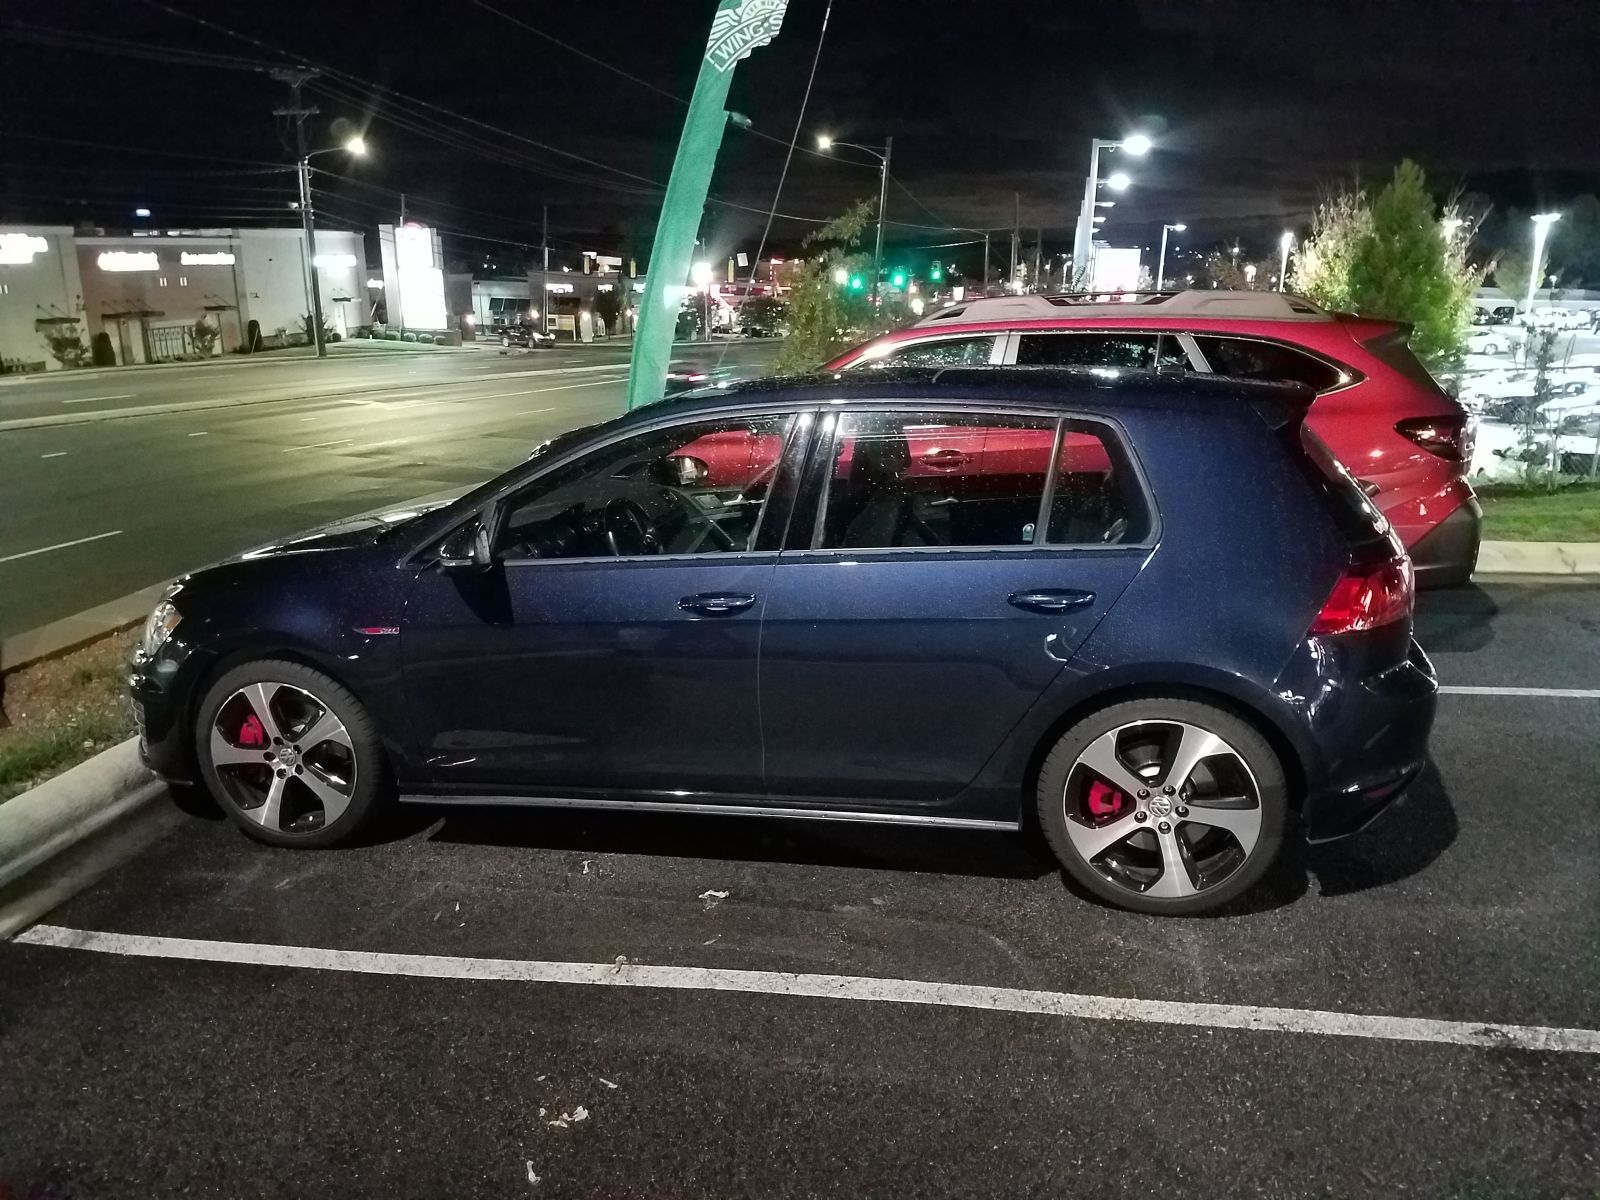 Parked next to my GTI on the night we bought it, photo taken because I was still surprised by the size, even though that is why I bought it.